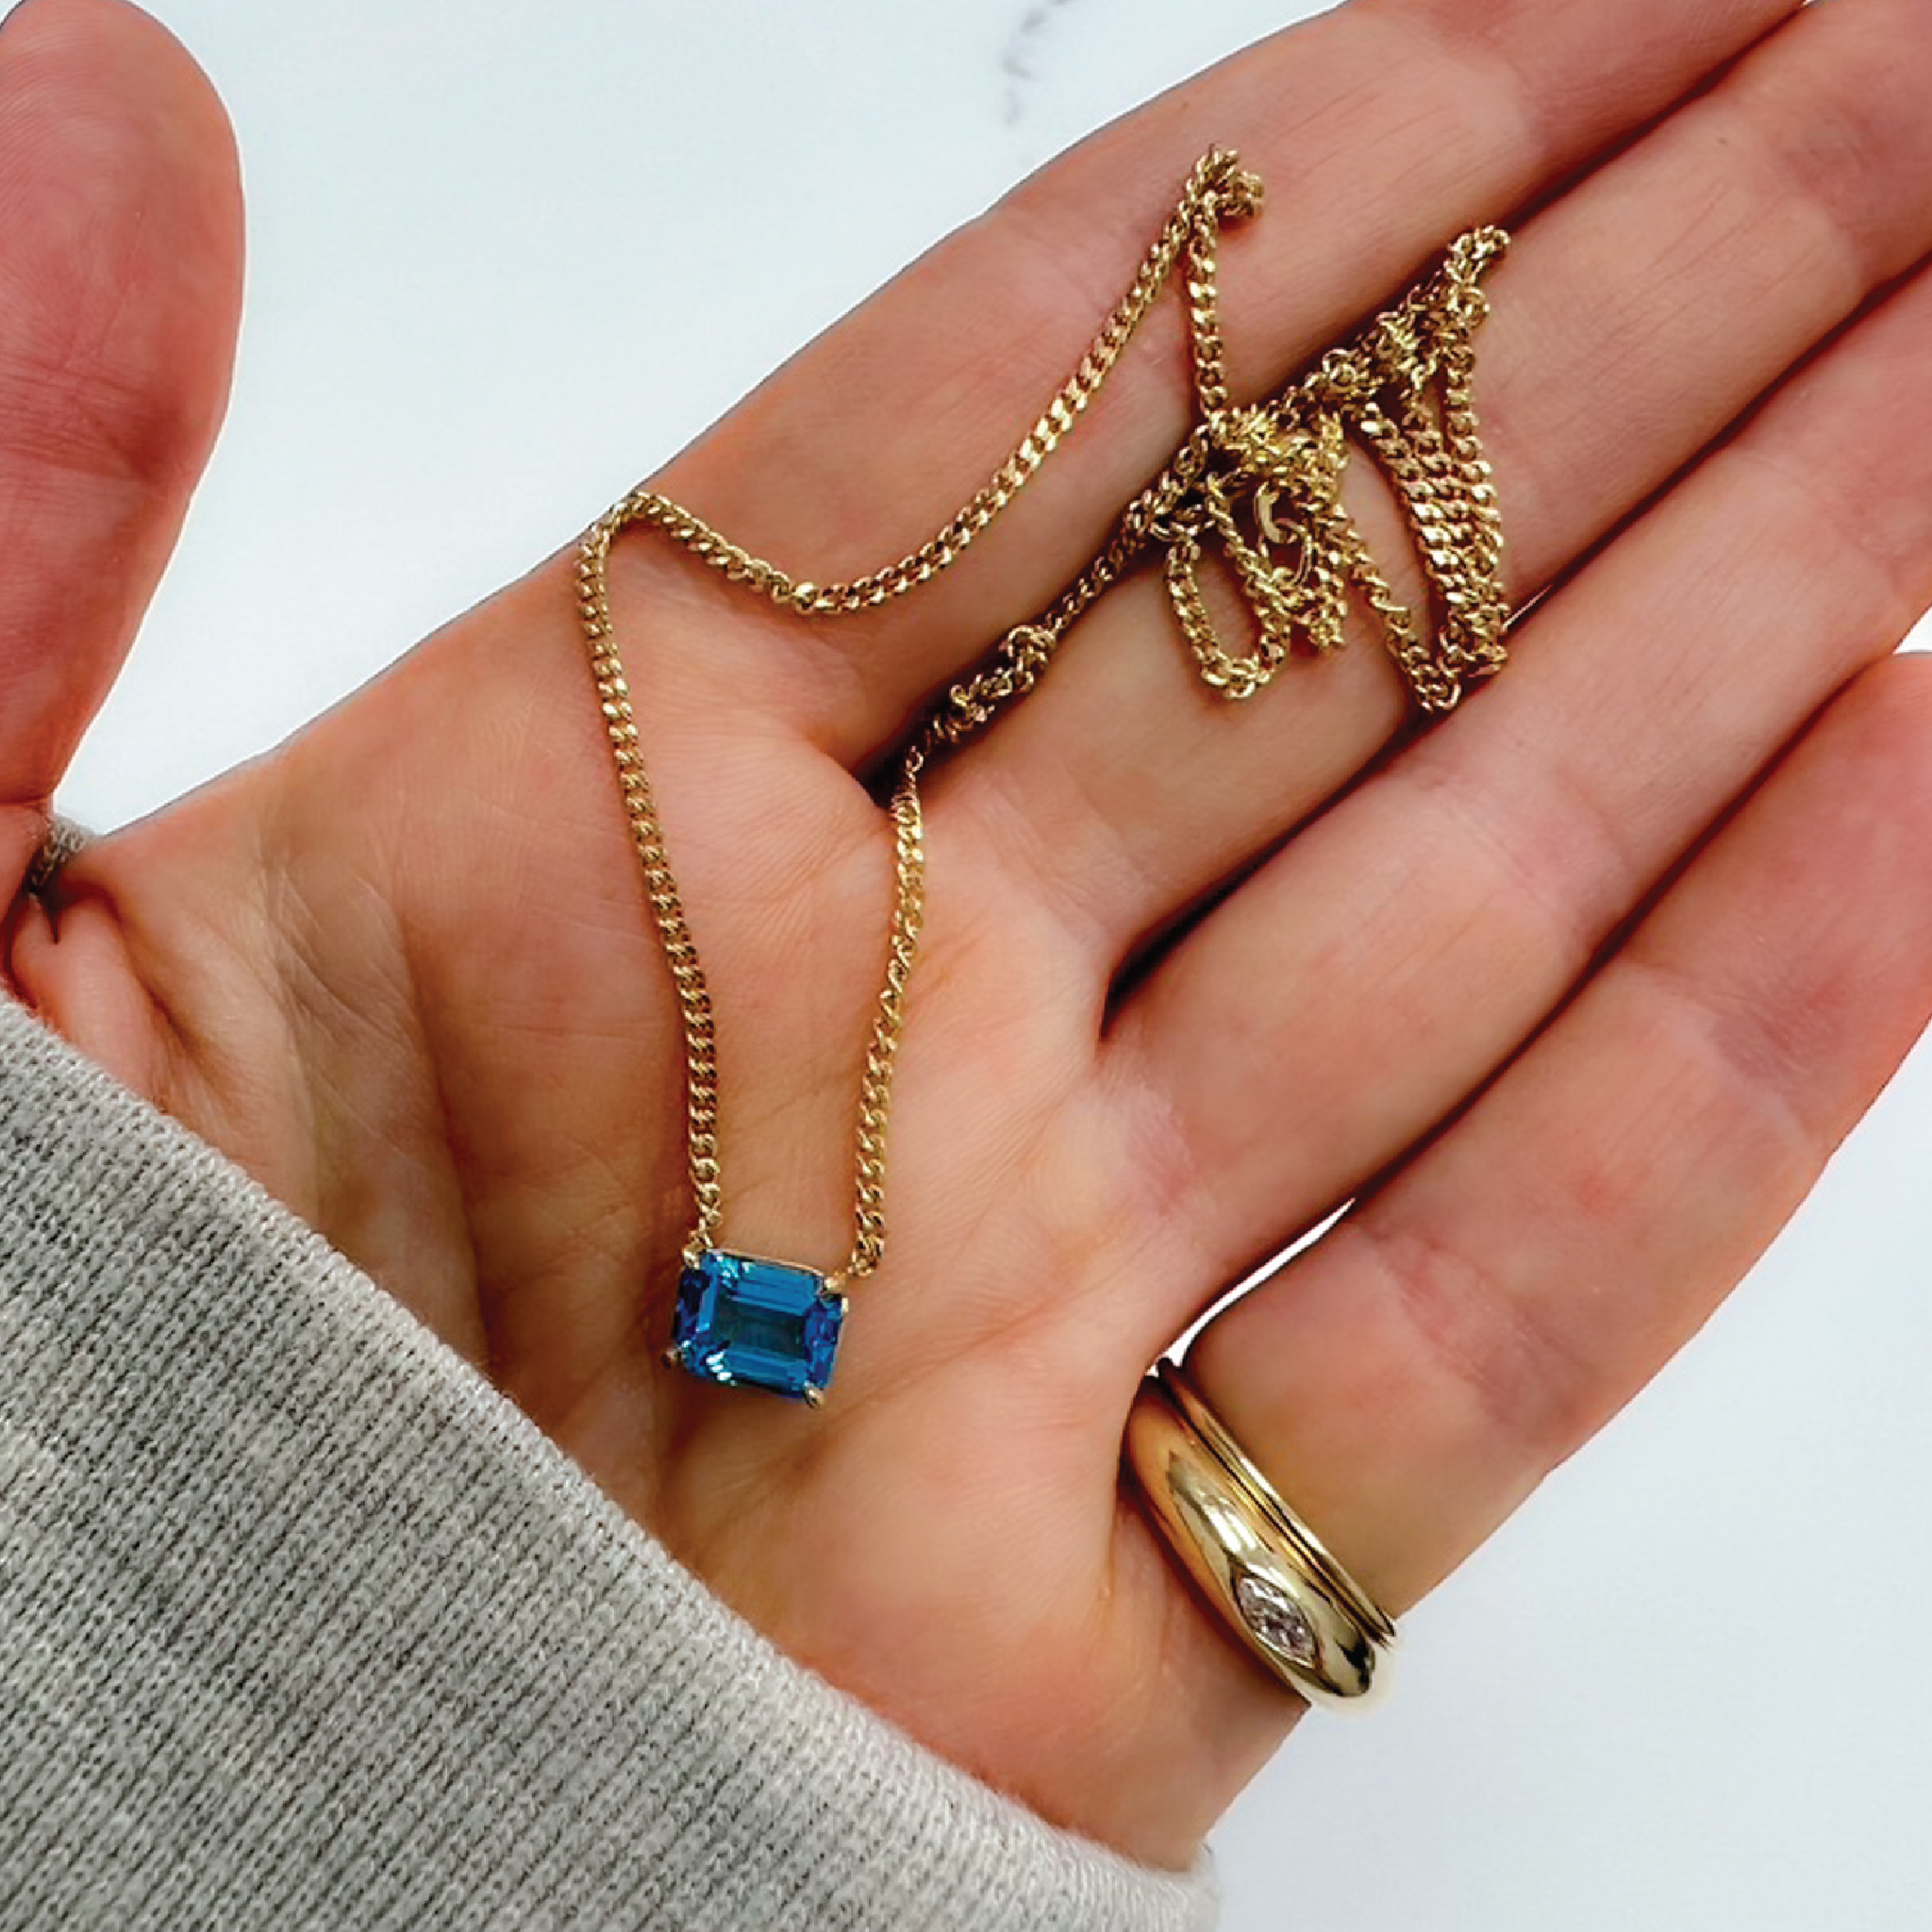 Blue Topaz Curb Chain Necklace